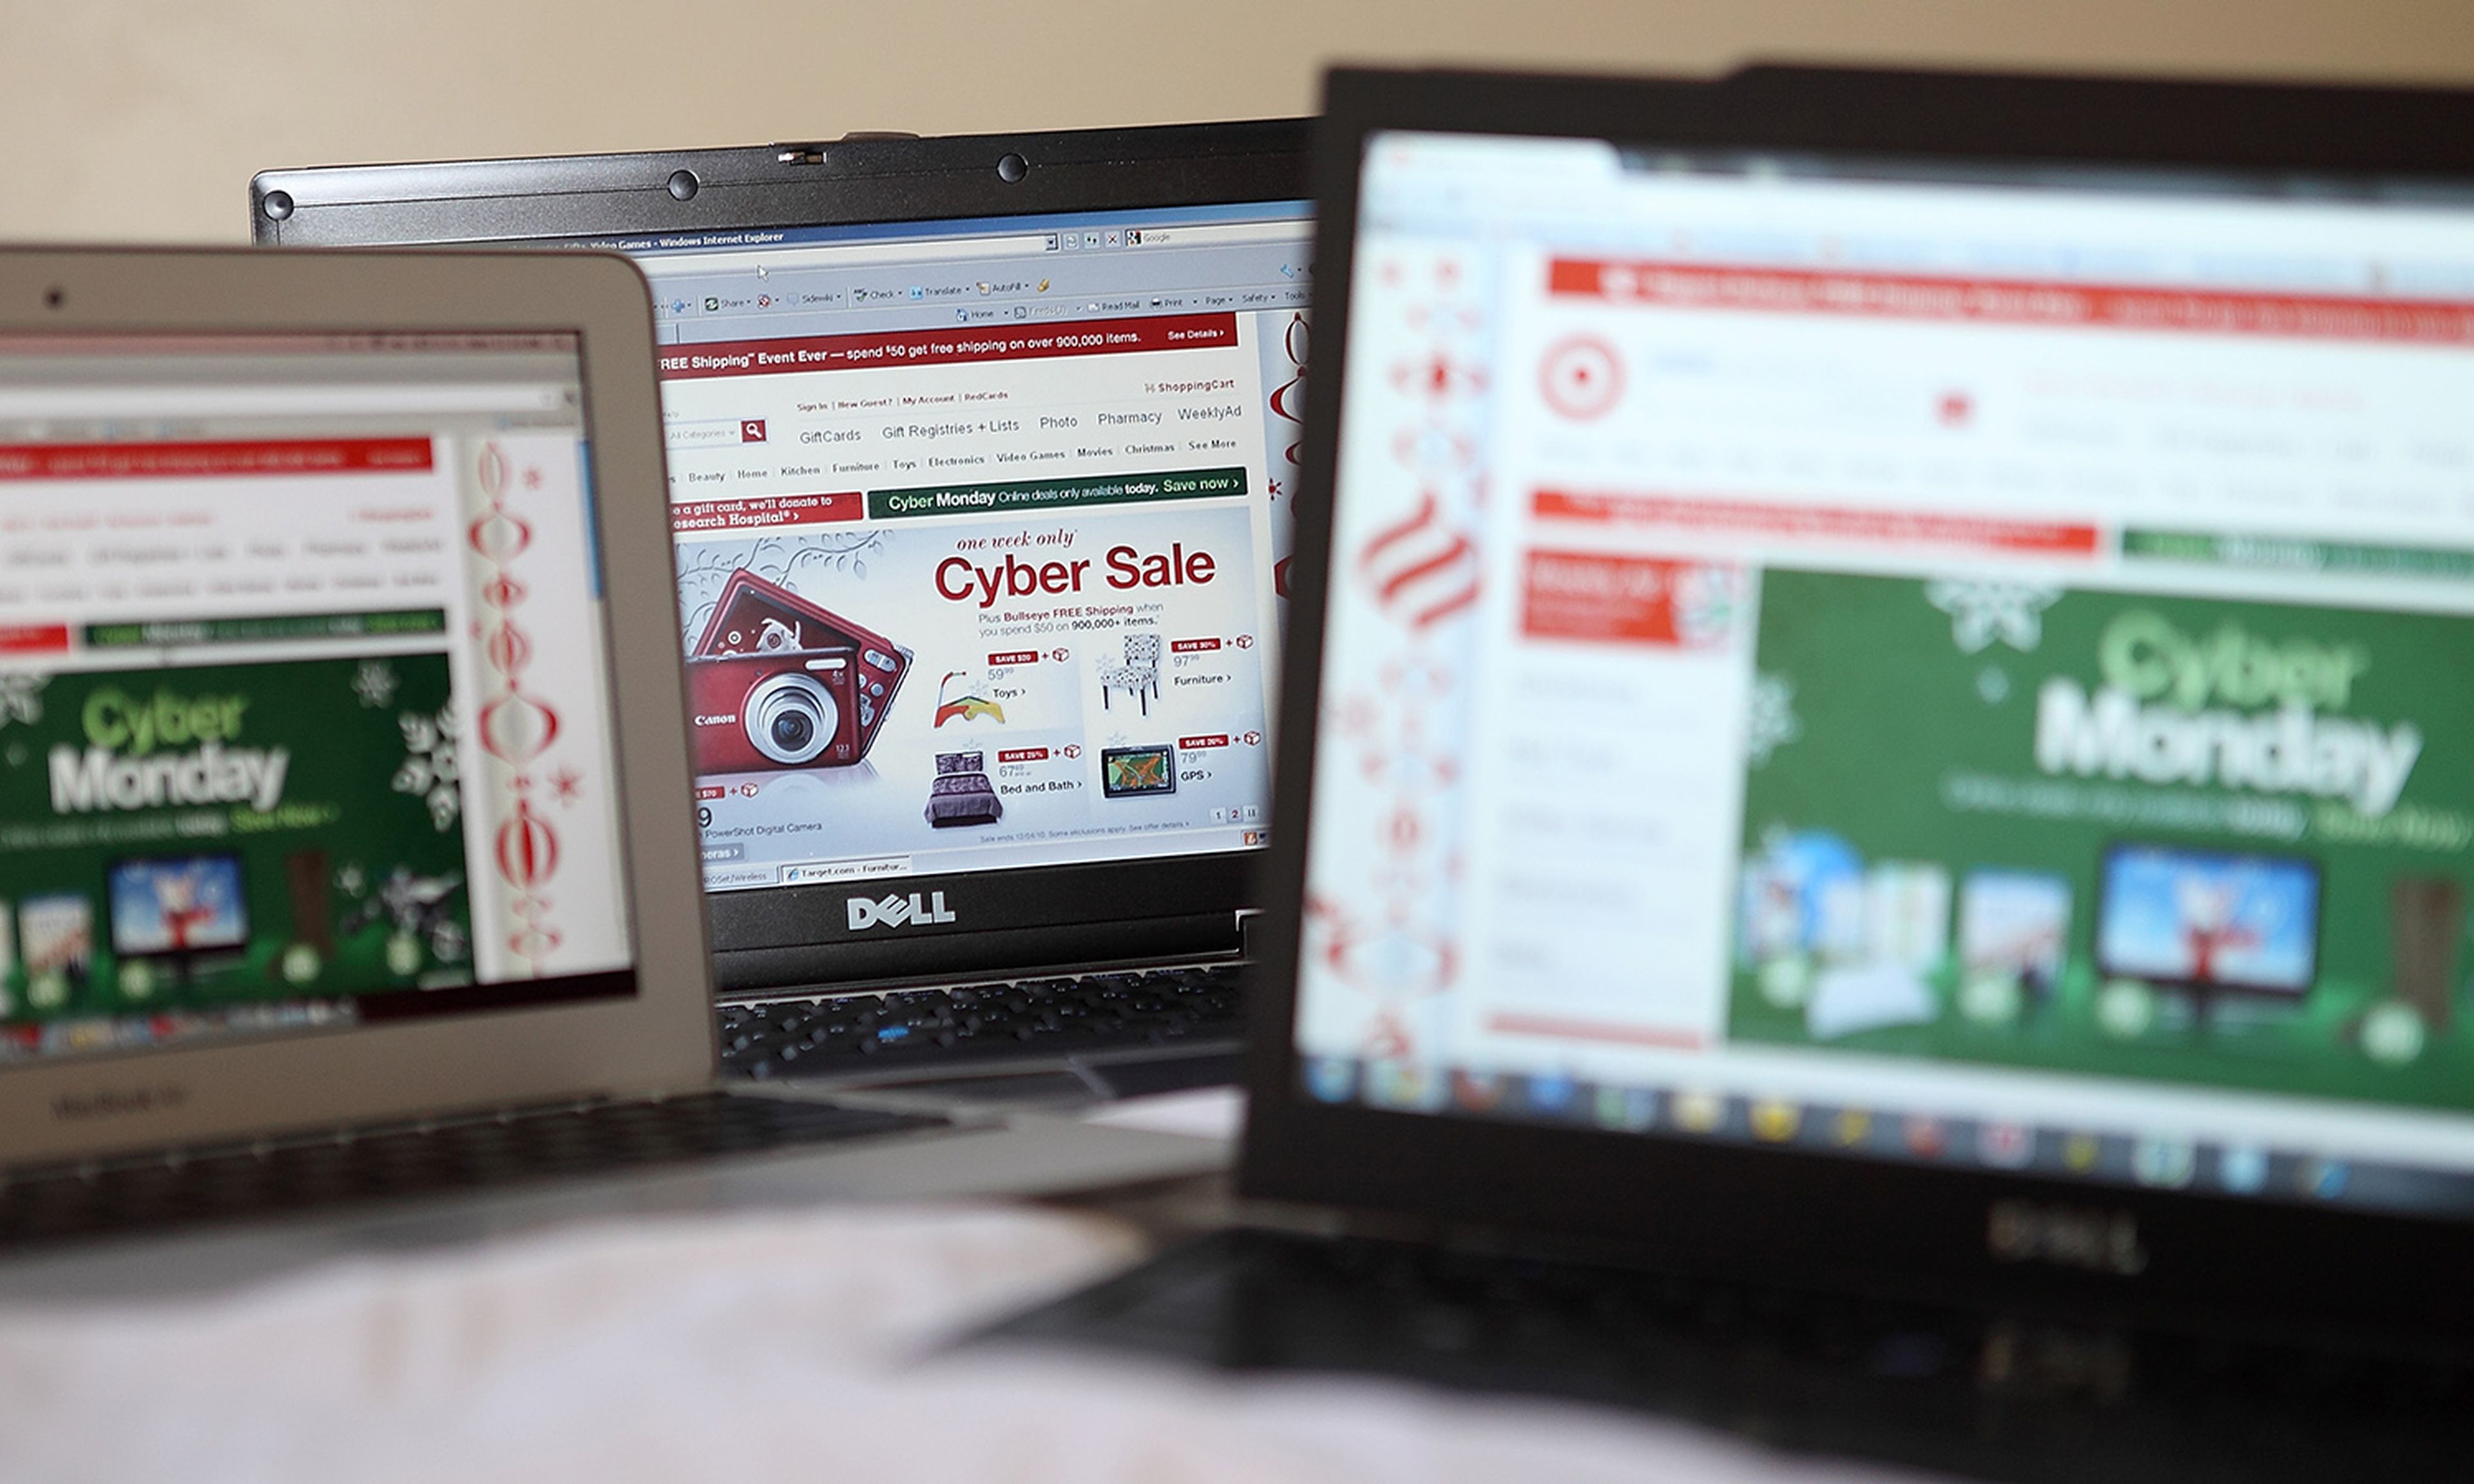 &#8220;Solver Bots,&#8221; API-as-a-service tools, allow bad actors to bypass the majority of bot management systems, according to research released Friday. Pictured: Cyber Monday sales are displayed on laptop computers on Nov. 29, 2010. (Photo Illustration by Justin Sullivan/Getty Images)